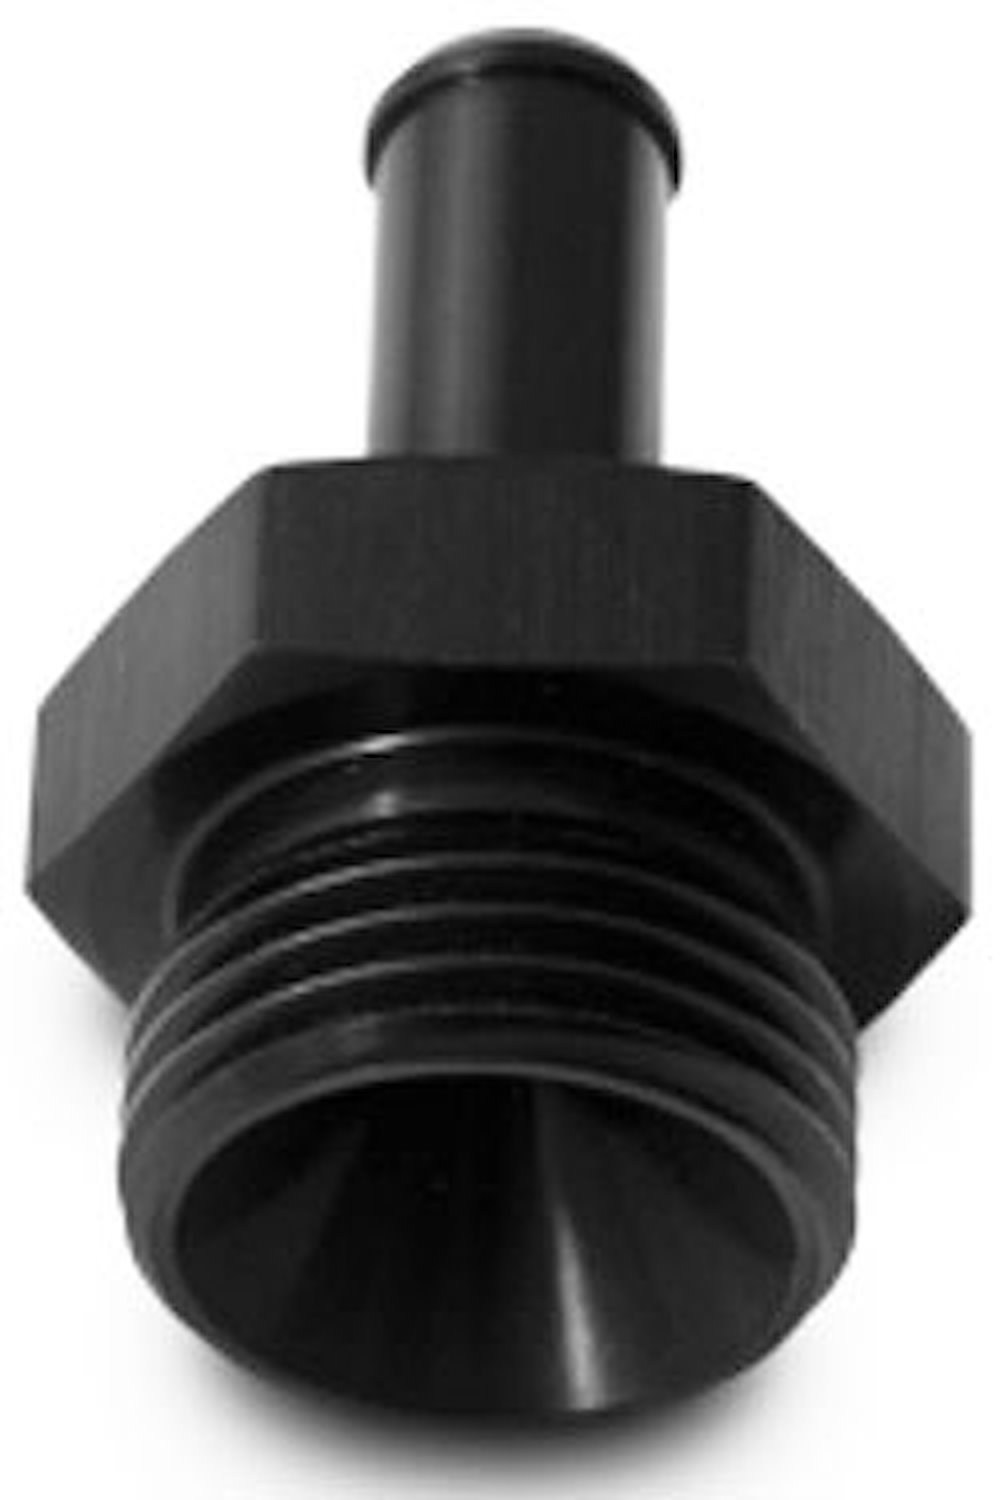 Straight Male AN to Hose Barb Adapter Fitting [-20 AN Male ORB to 1-1/2 in. Hose Barb, Black]